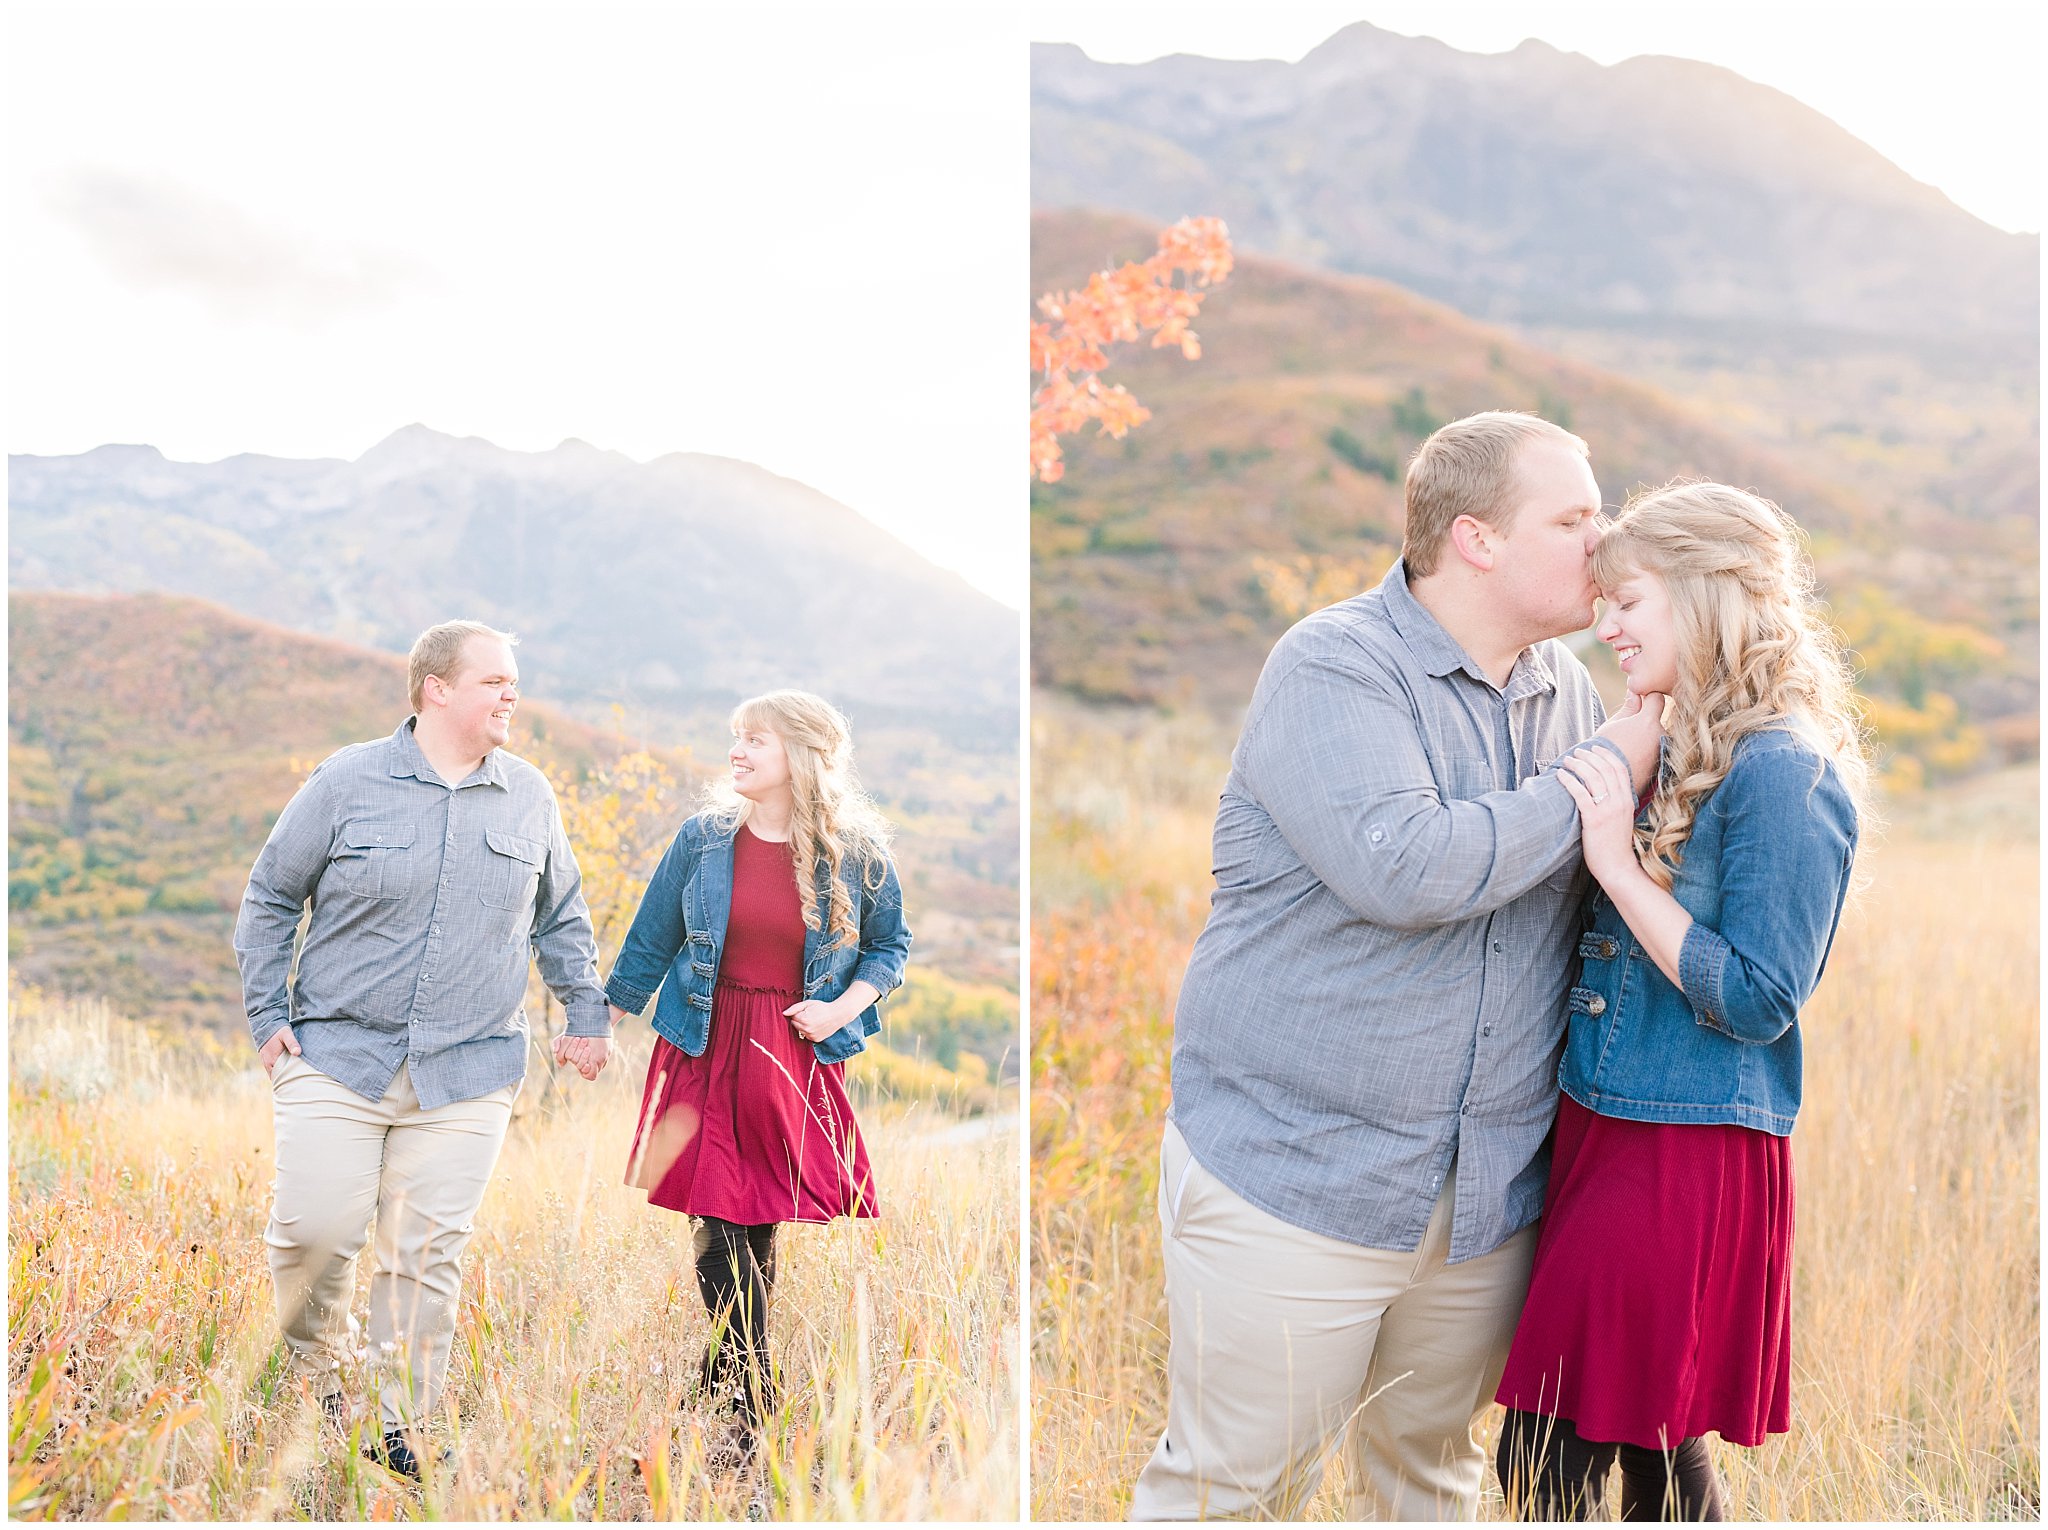 Couple dressed up with girl in burgundy dress with jean jacket and guy in grey shirt and light colored pants | Mountain engagement | Trapper's Loop Fall Engagement Session | Snowbasin Utah Mountains | Jessie and Dallin Photography